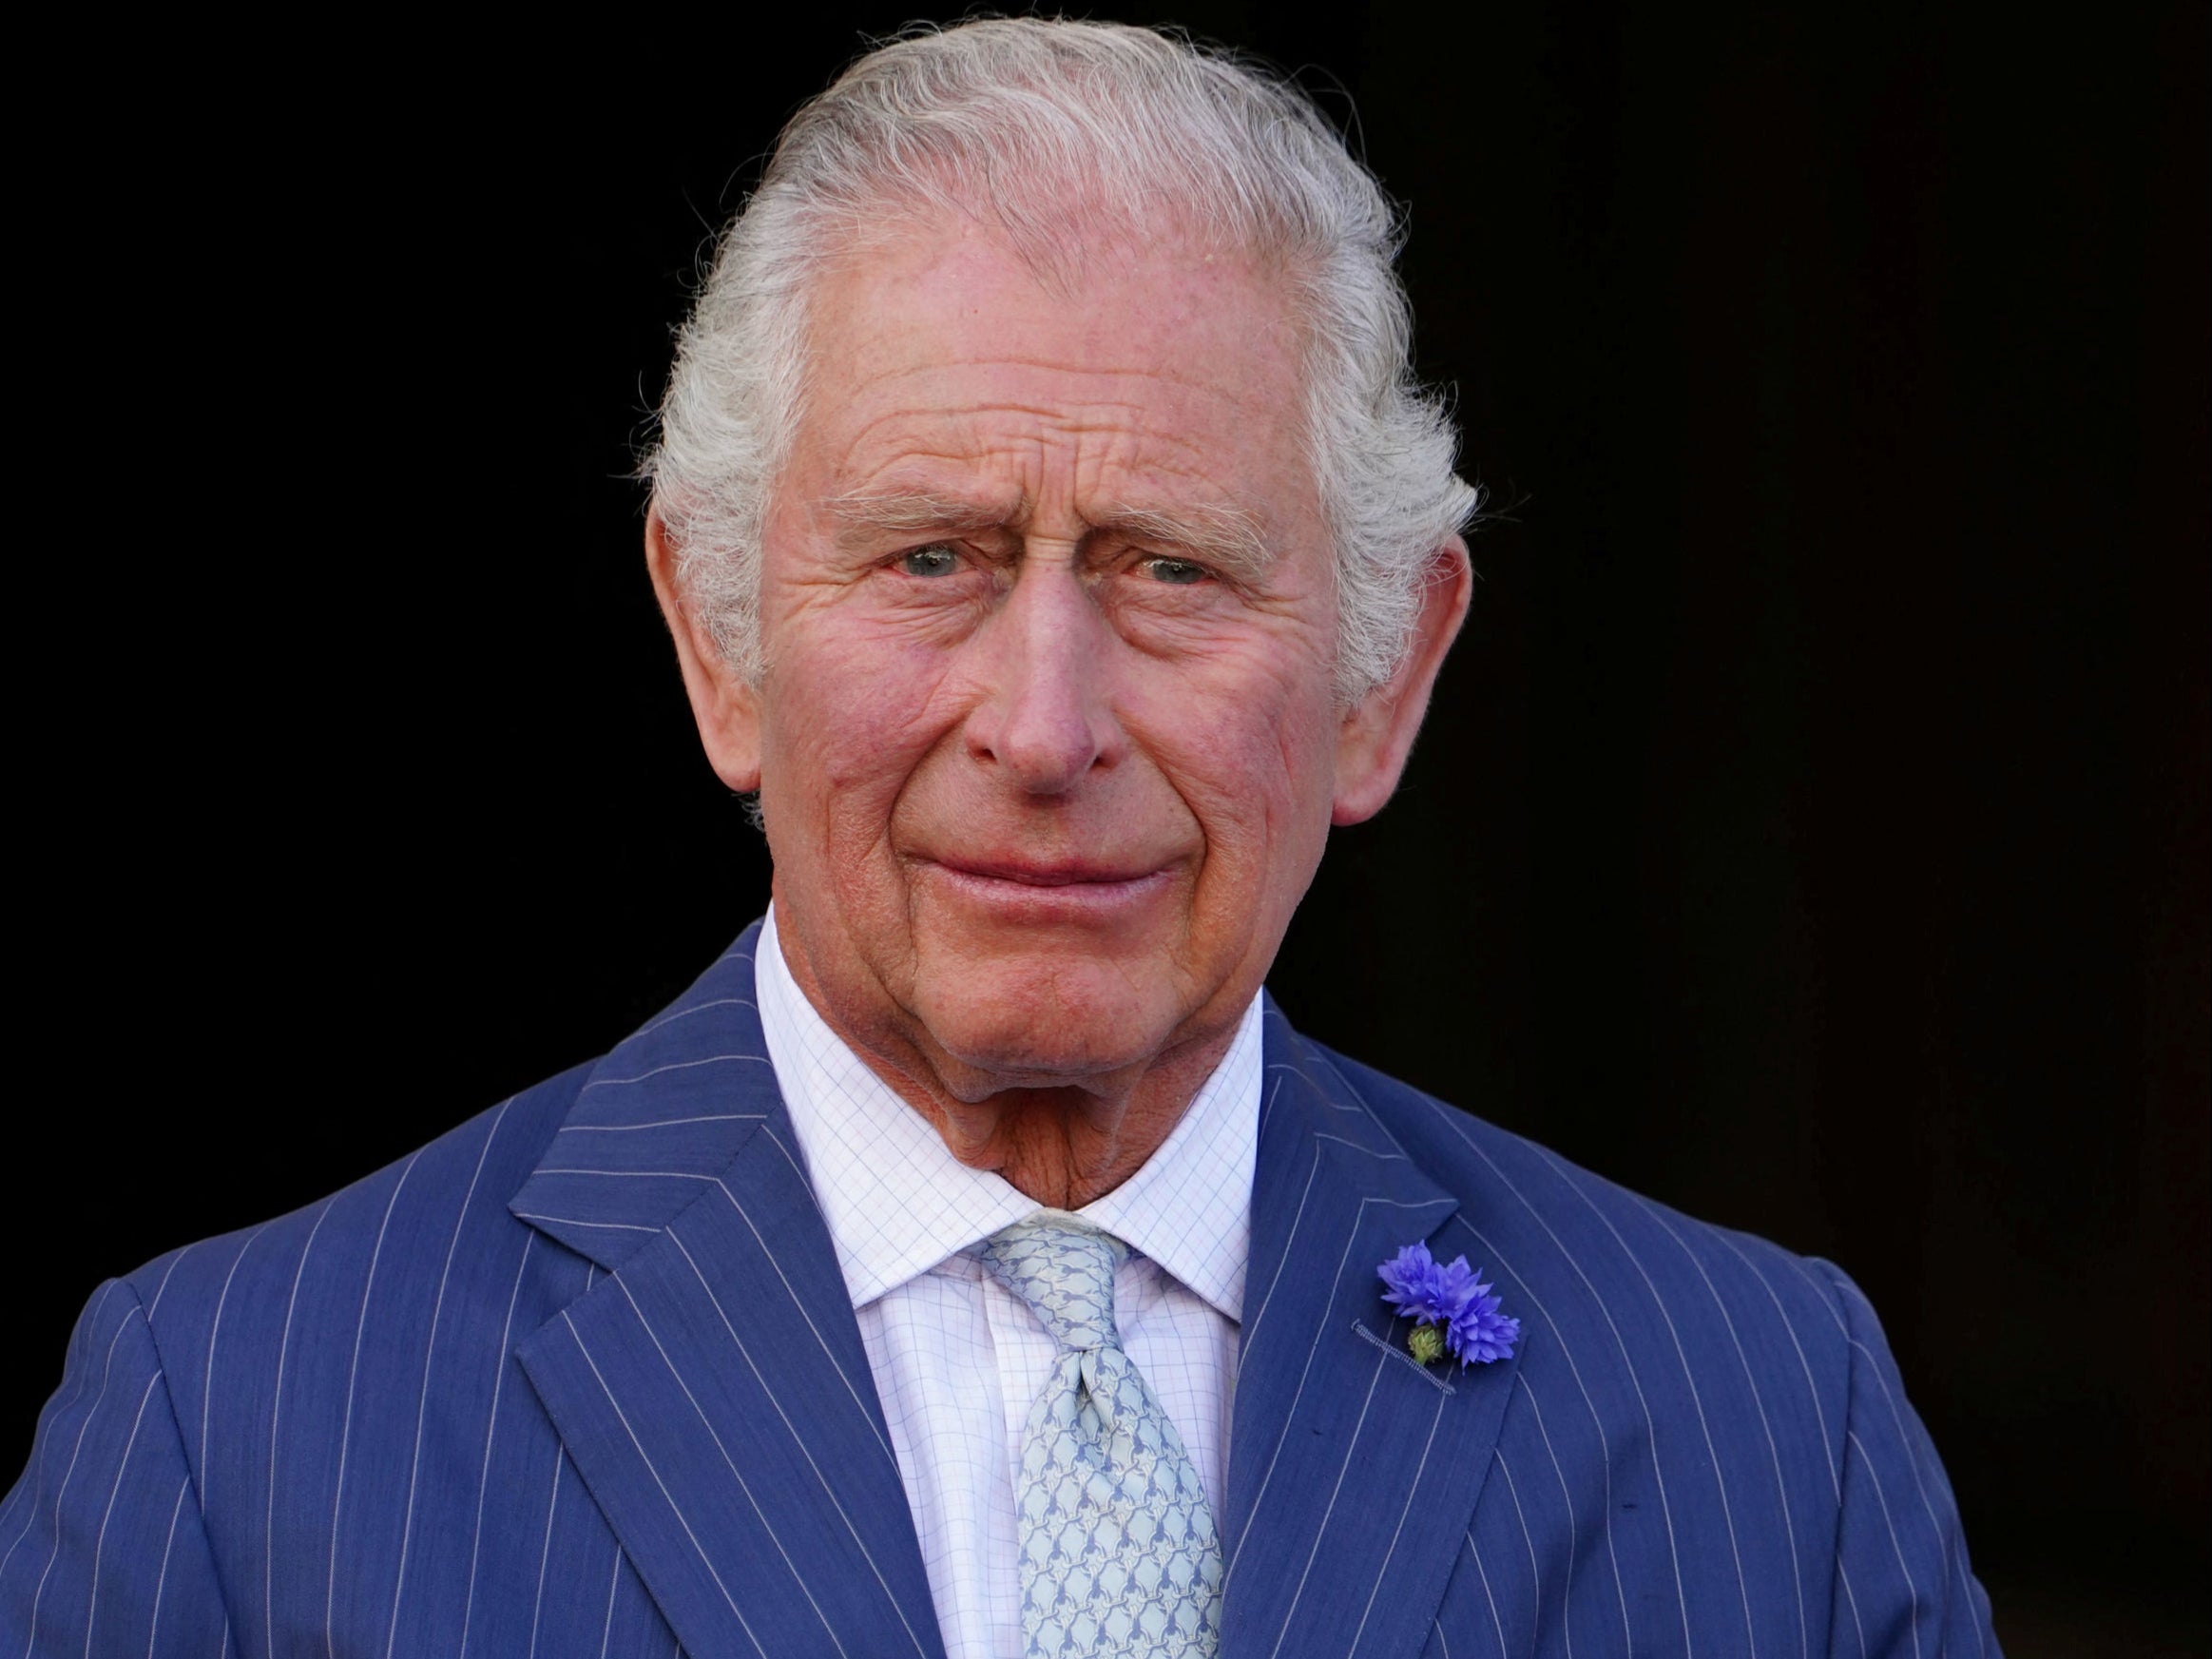 The Prince of Wales reportedly gave an honour to Lord Brownlow, owner of Havisham Properties, after he bought houses at Knockroon eco village